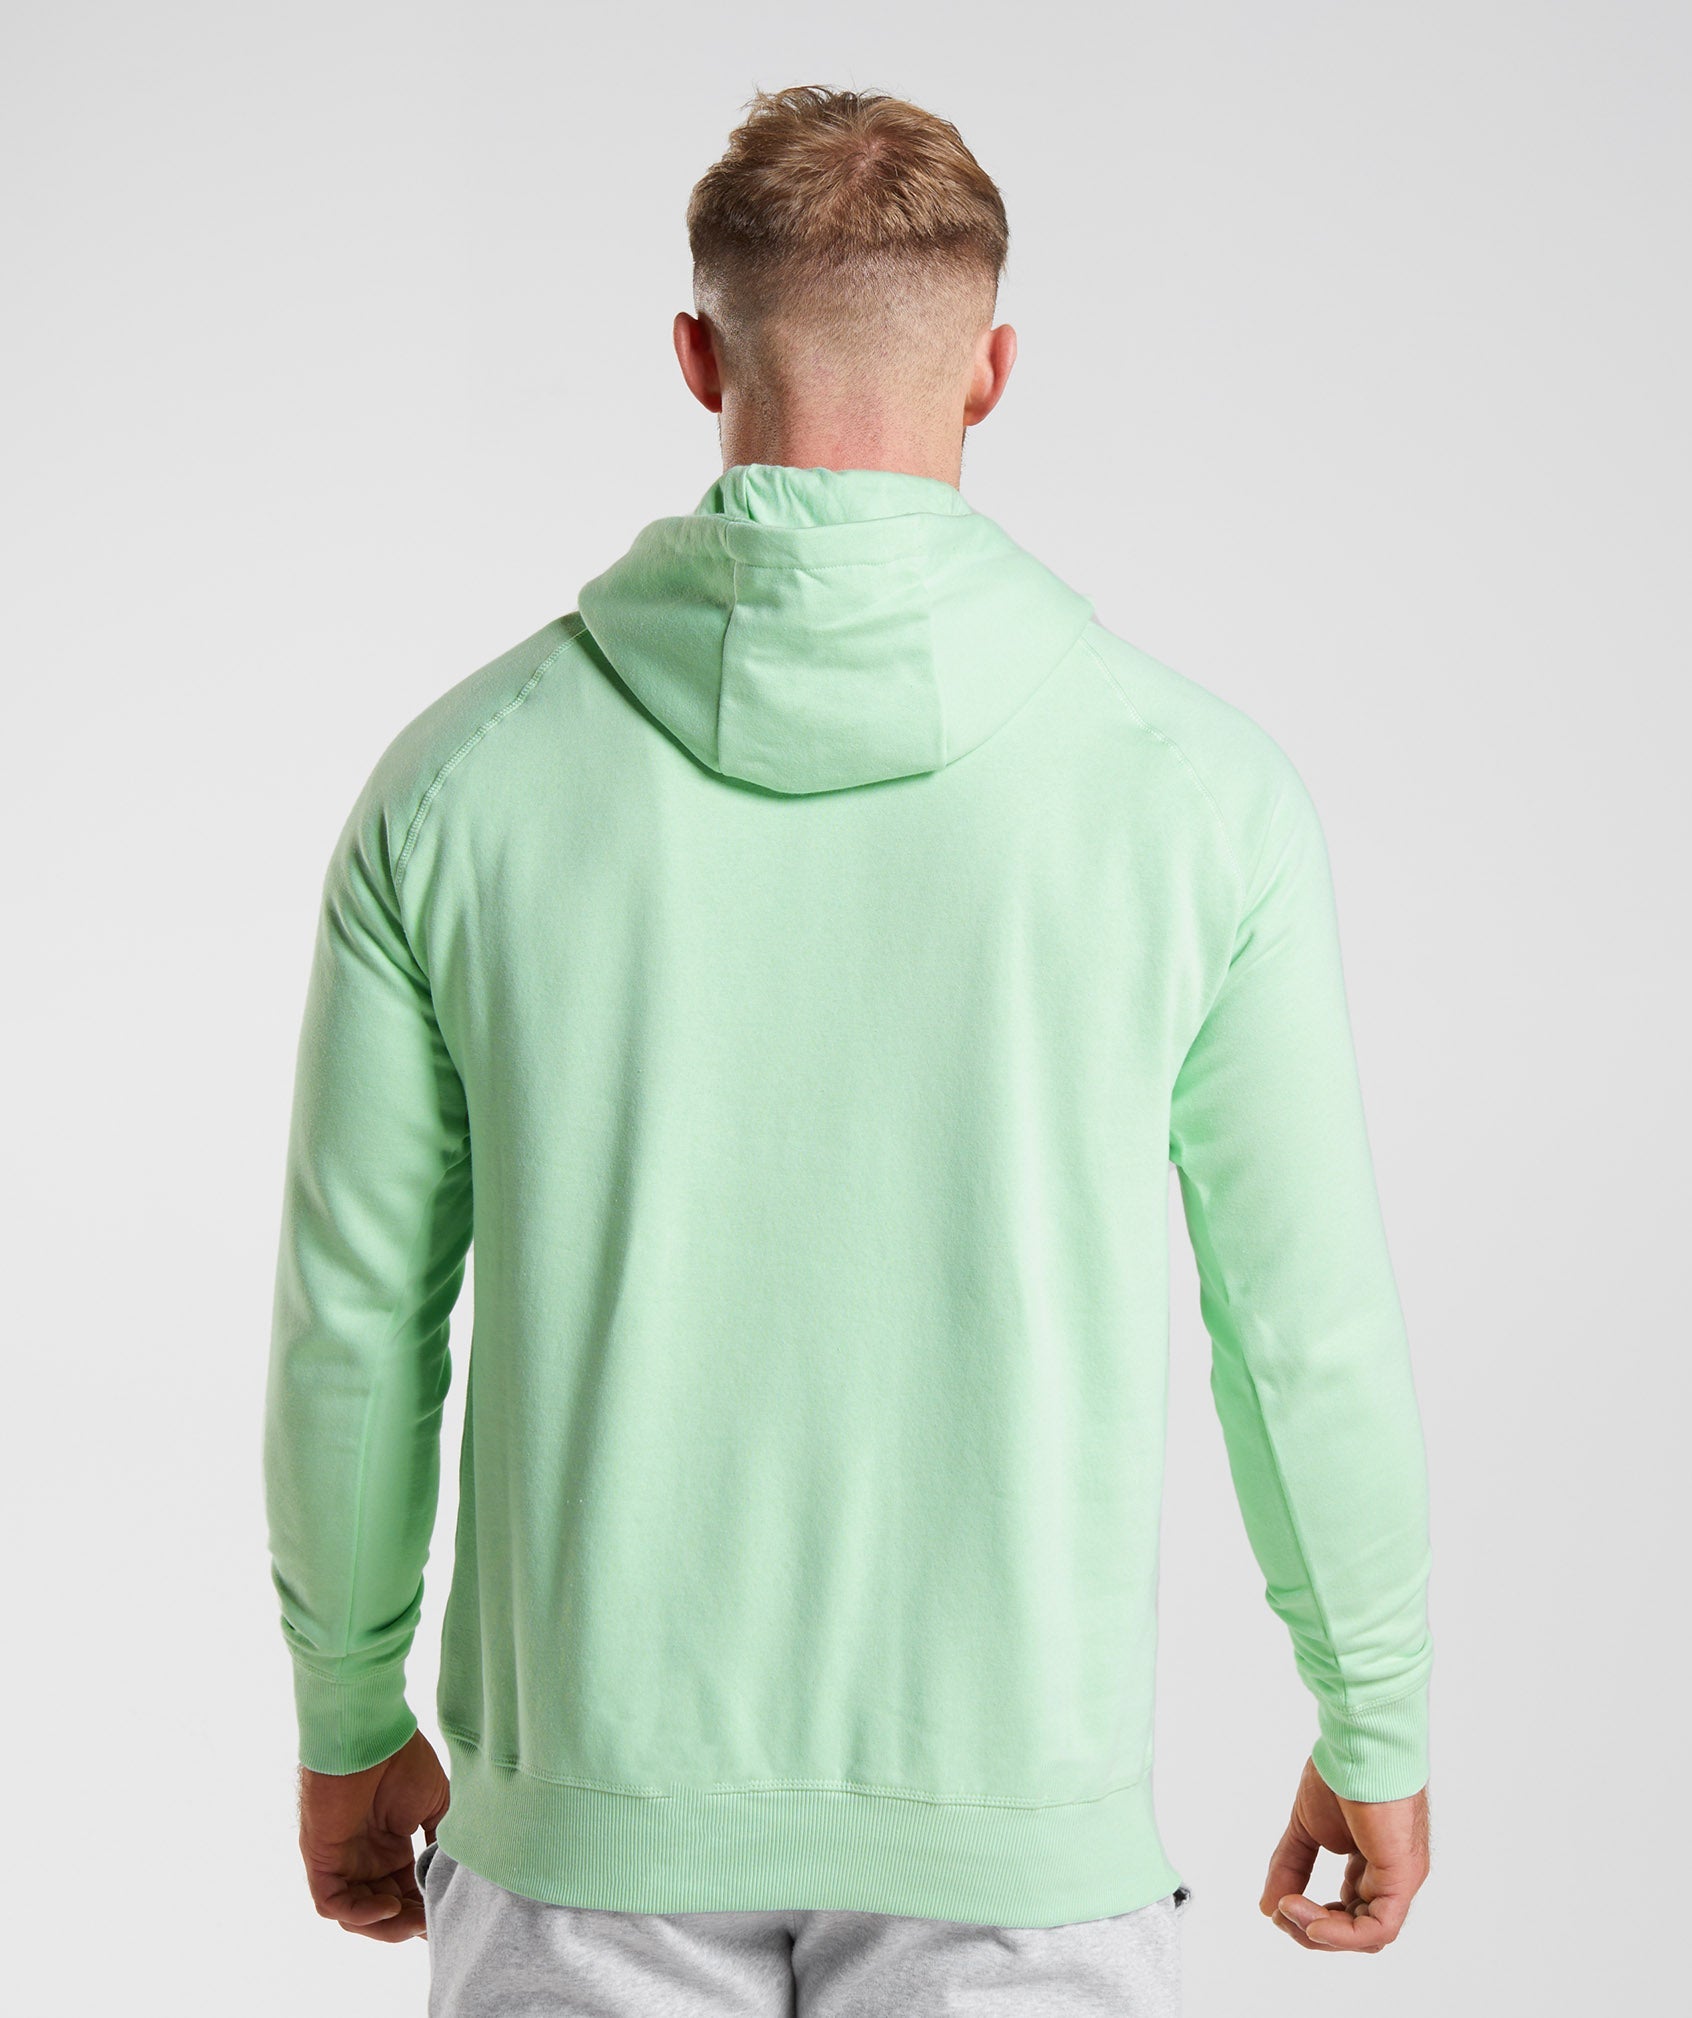 Apollo Hoodie in Aloe Green - view 2